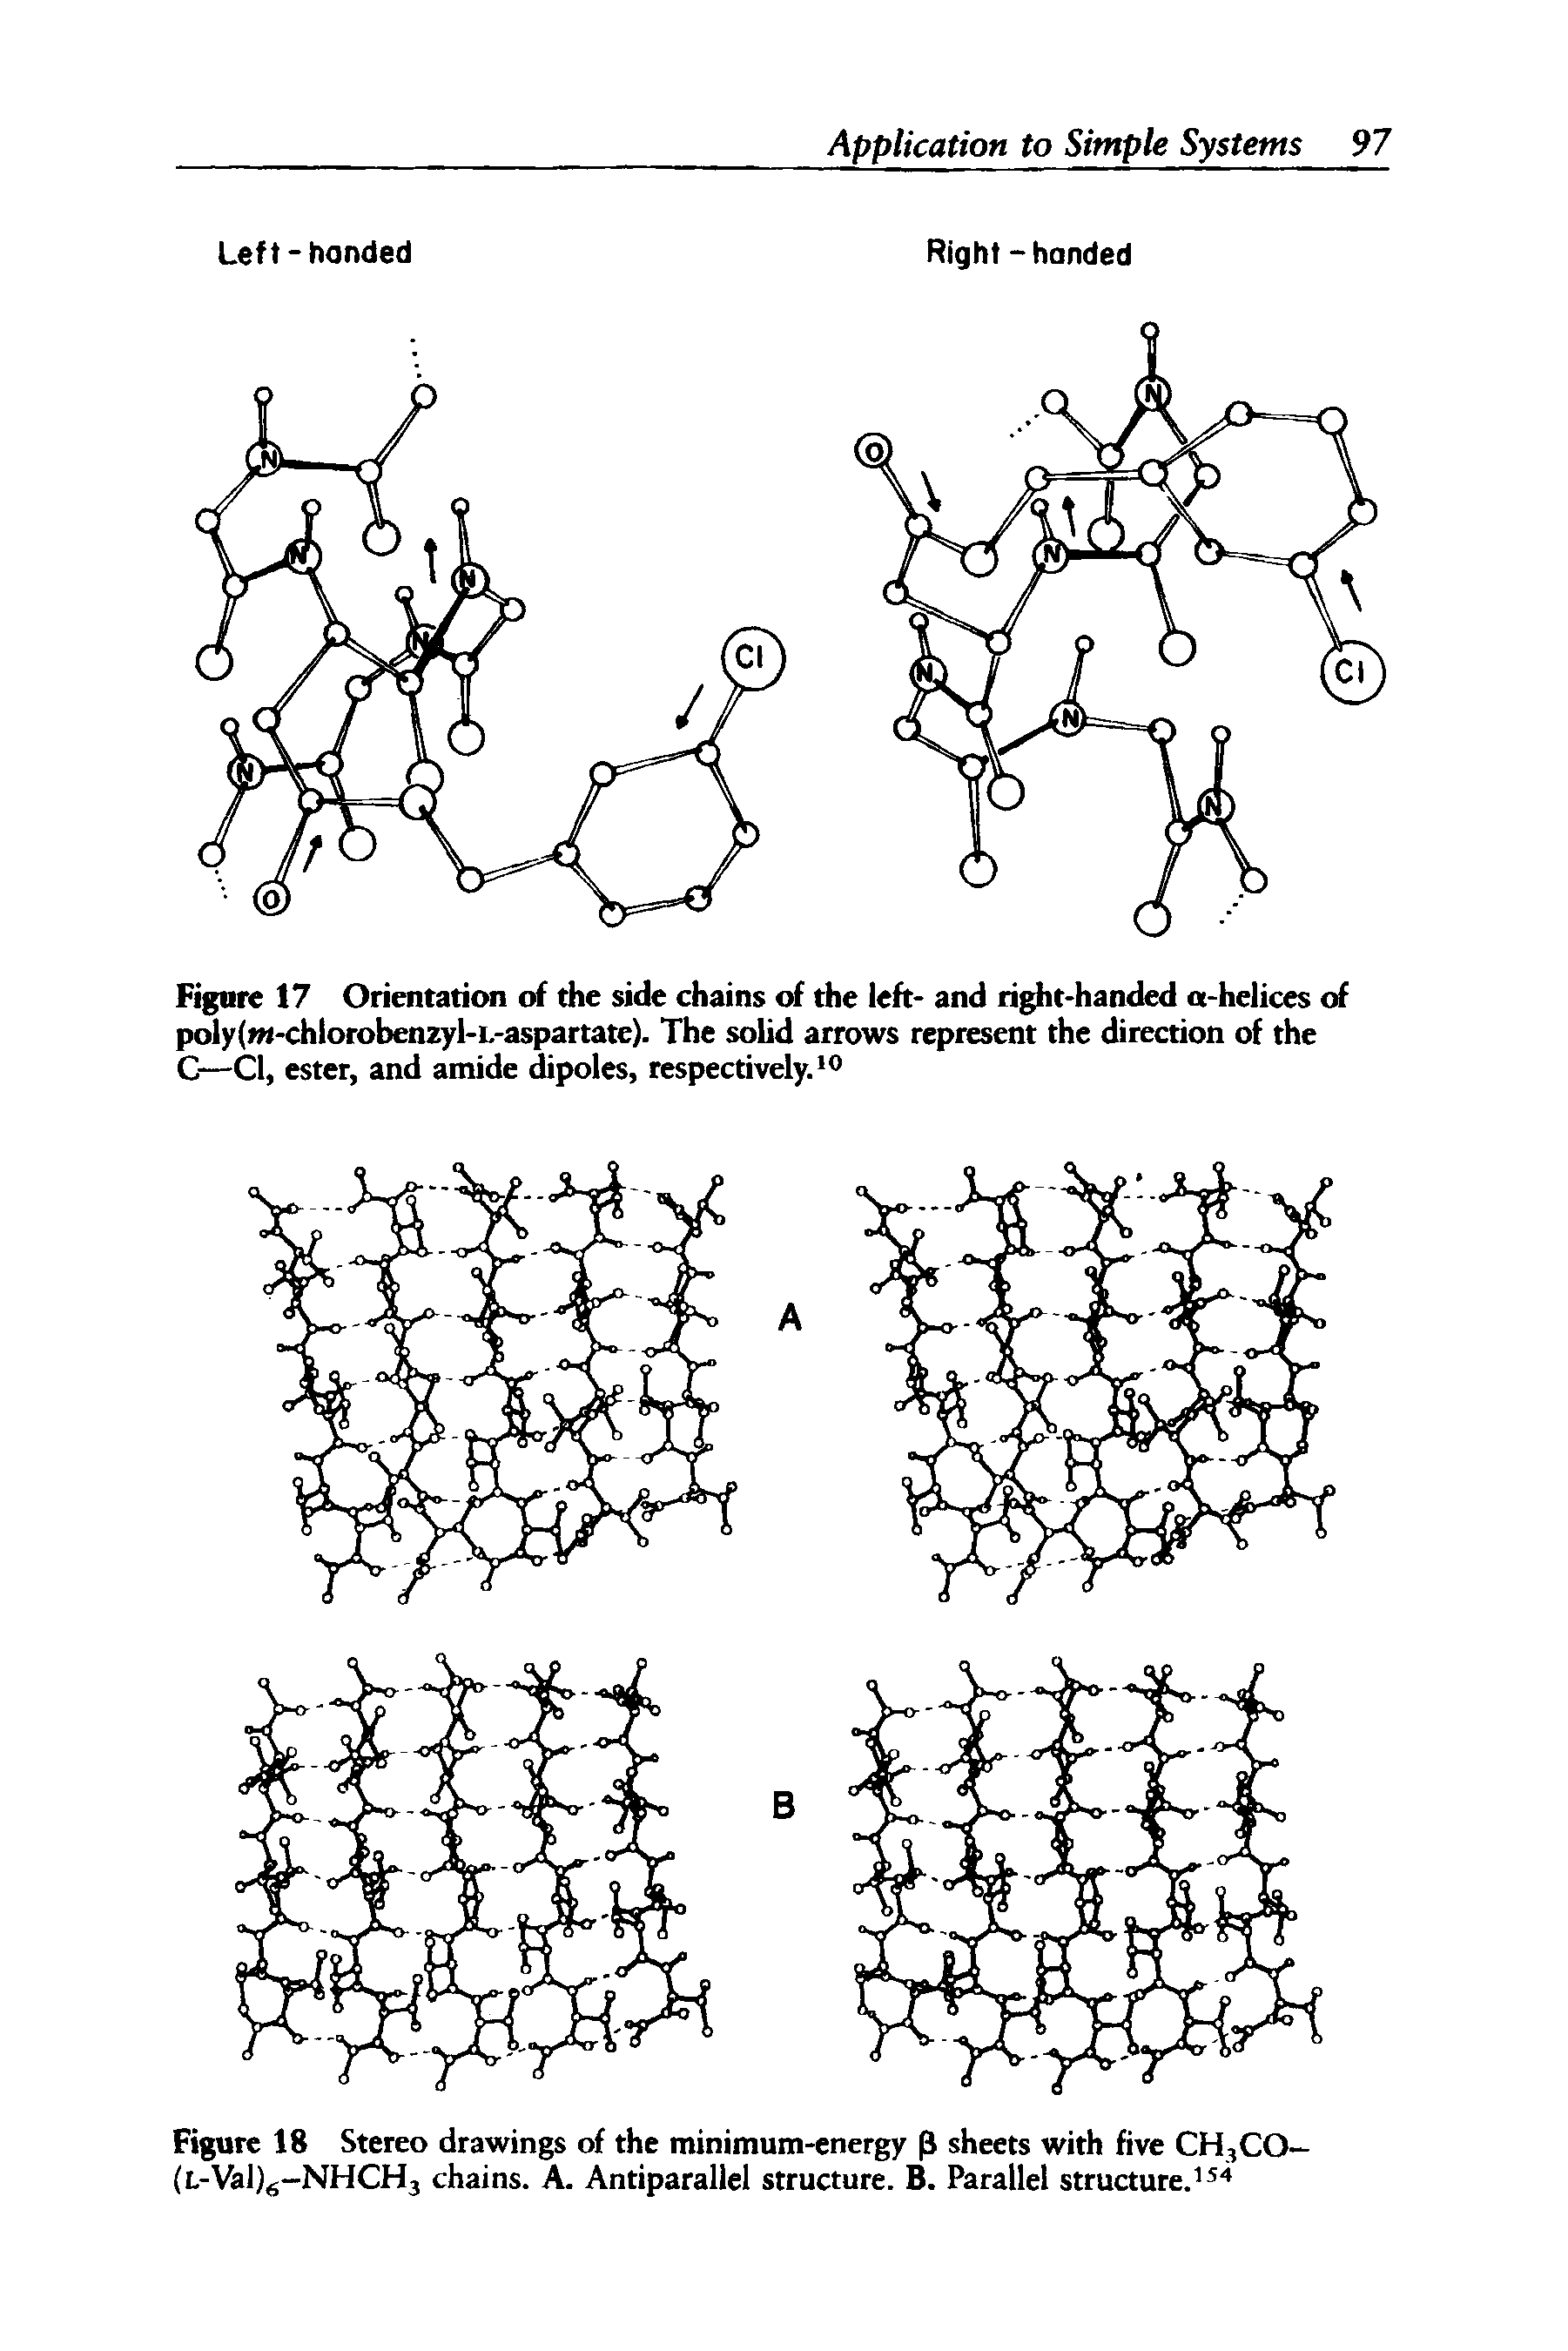 Figure 18 Stereo drawings of the minimum-energy p sheets with five CH,CO— (L-Val)6-NHCH3 chains. A. Antiparallel structure. B. Parallel structure.15,1...